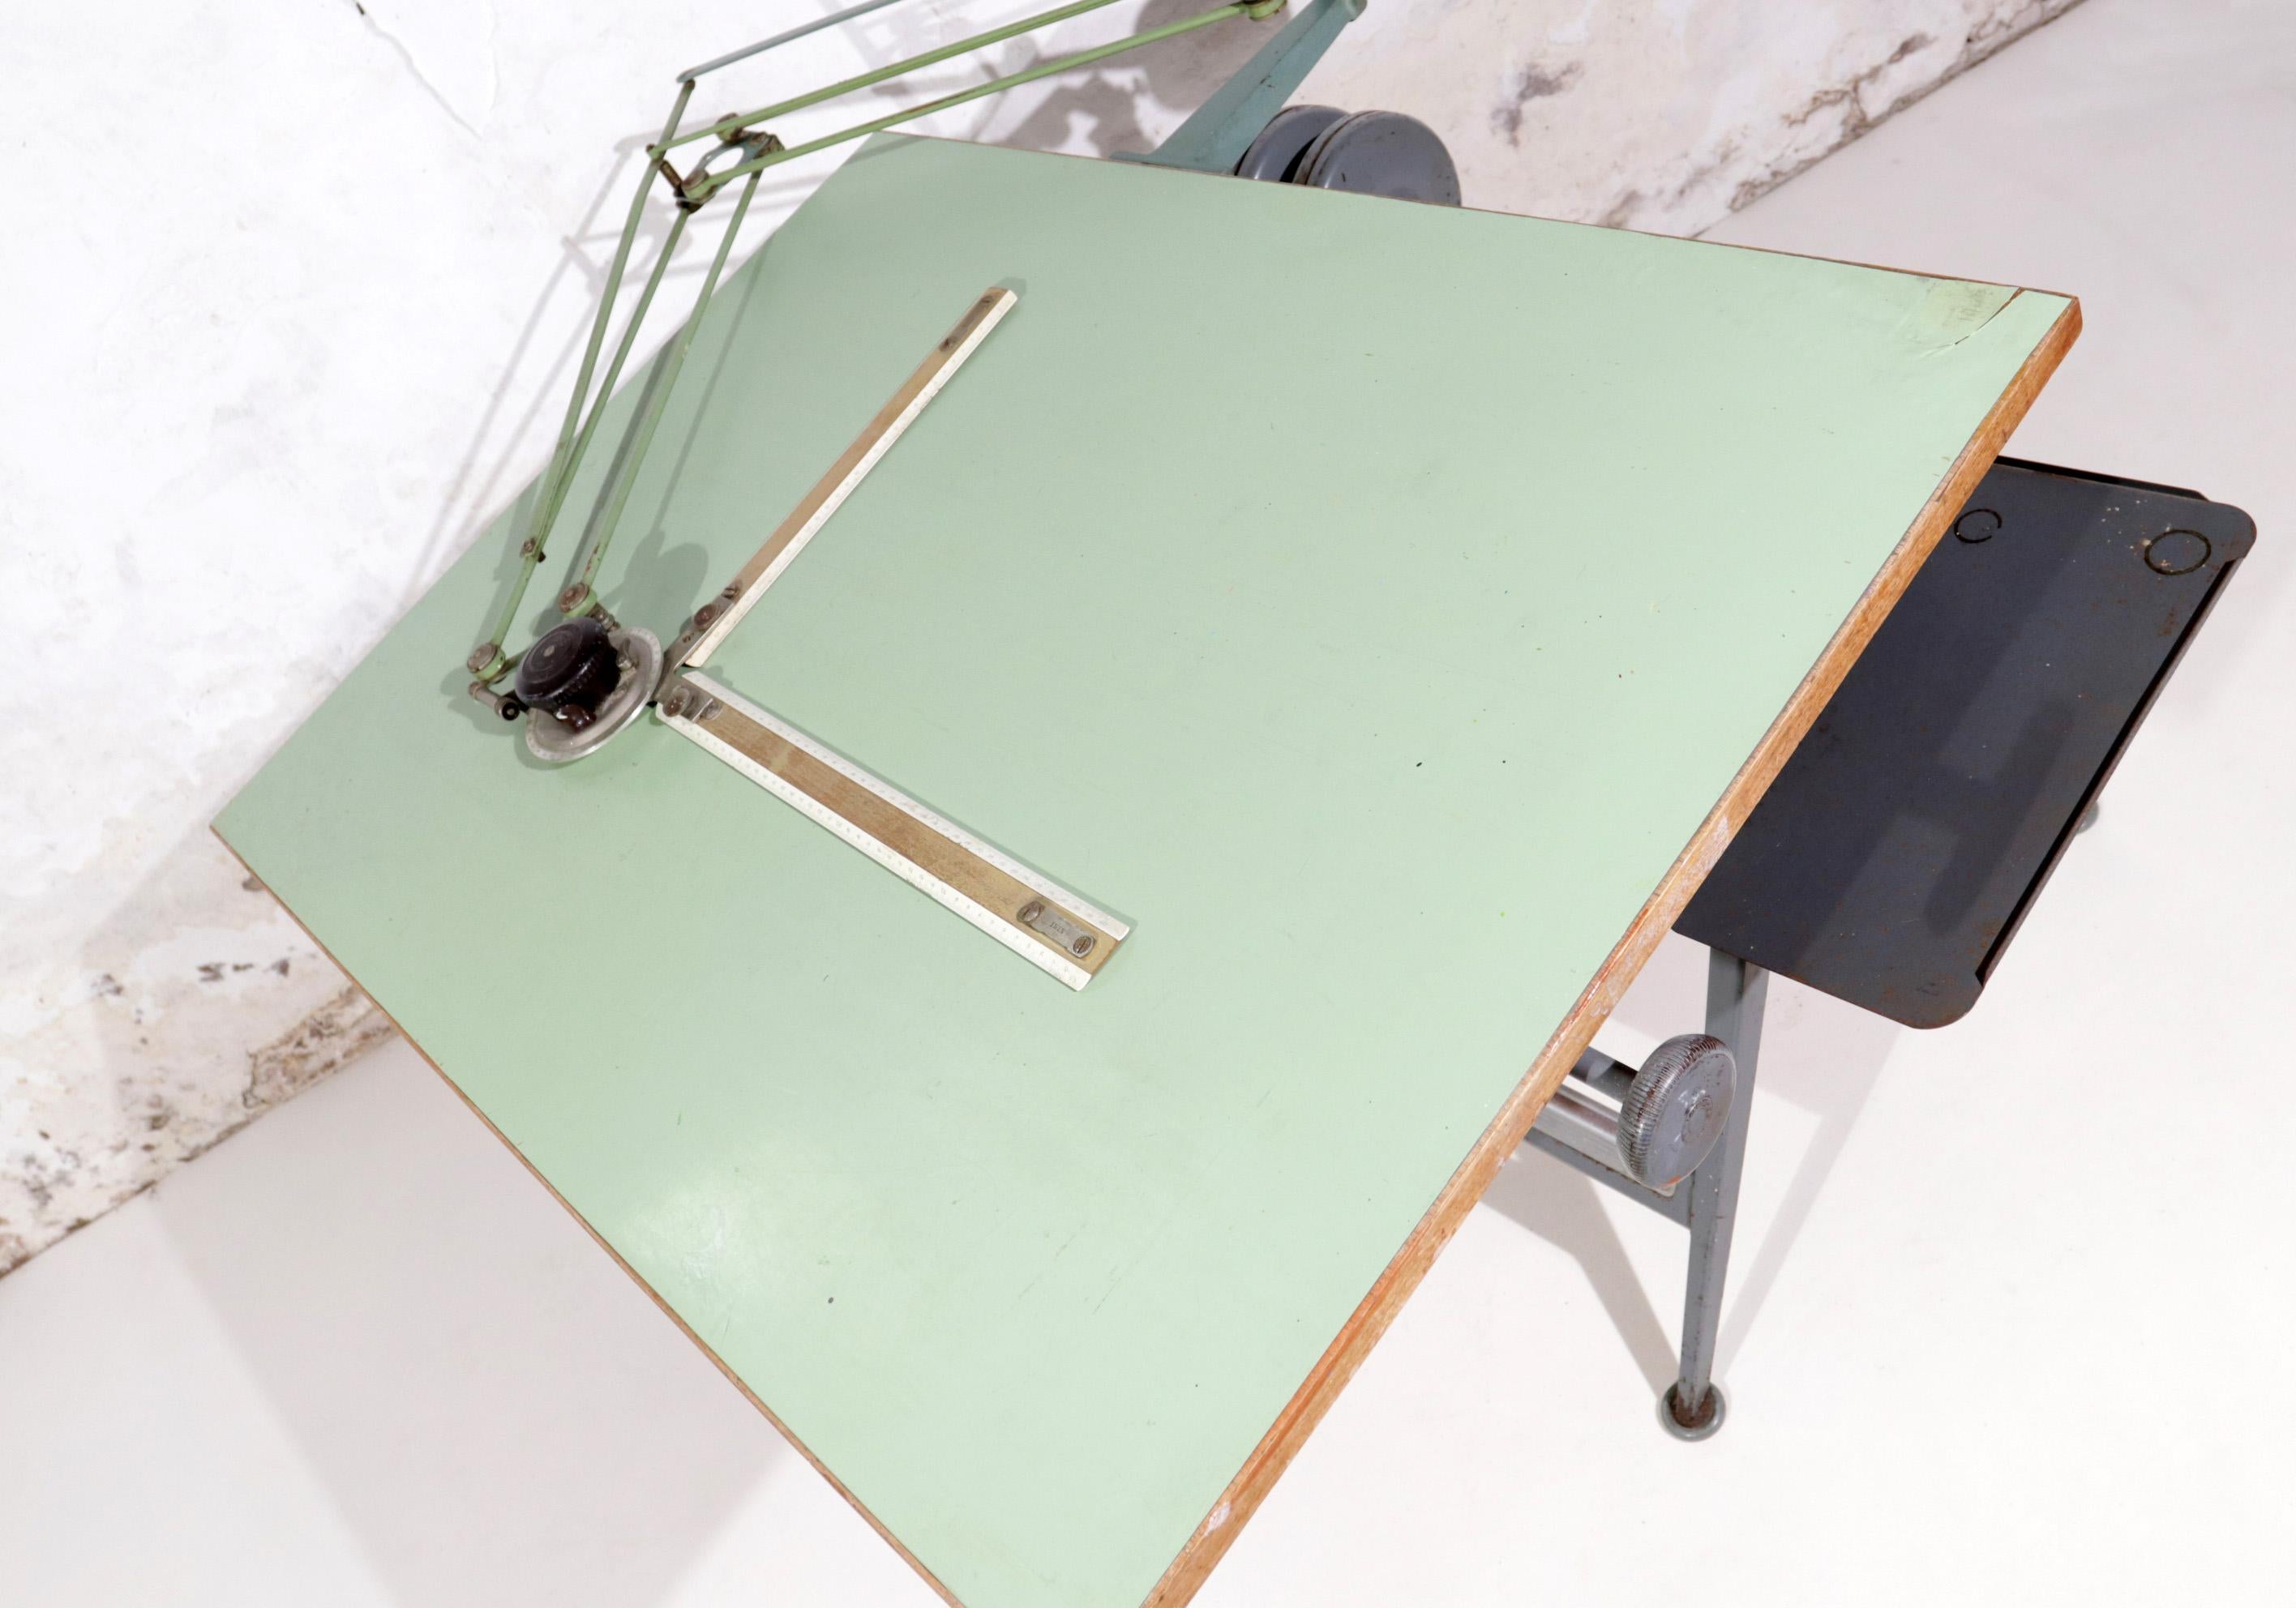 Early Reply Architect Drafting Table Friso Kramer, Wim Rietveld Ahrend de Cirkel 13